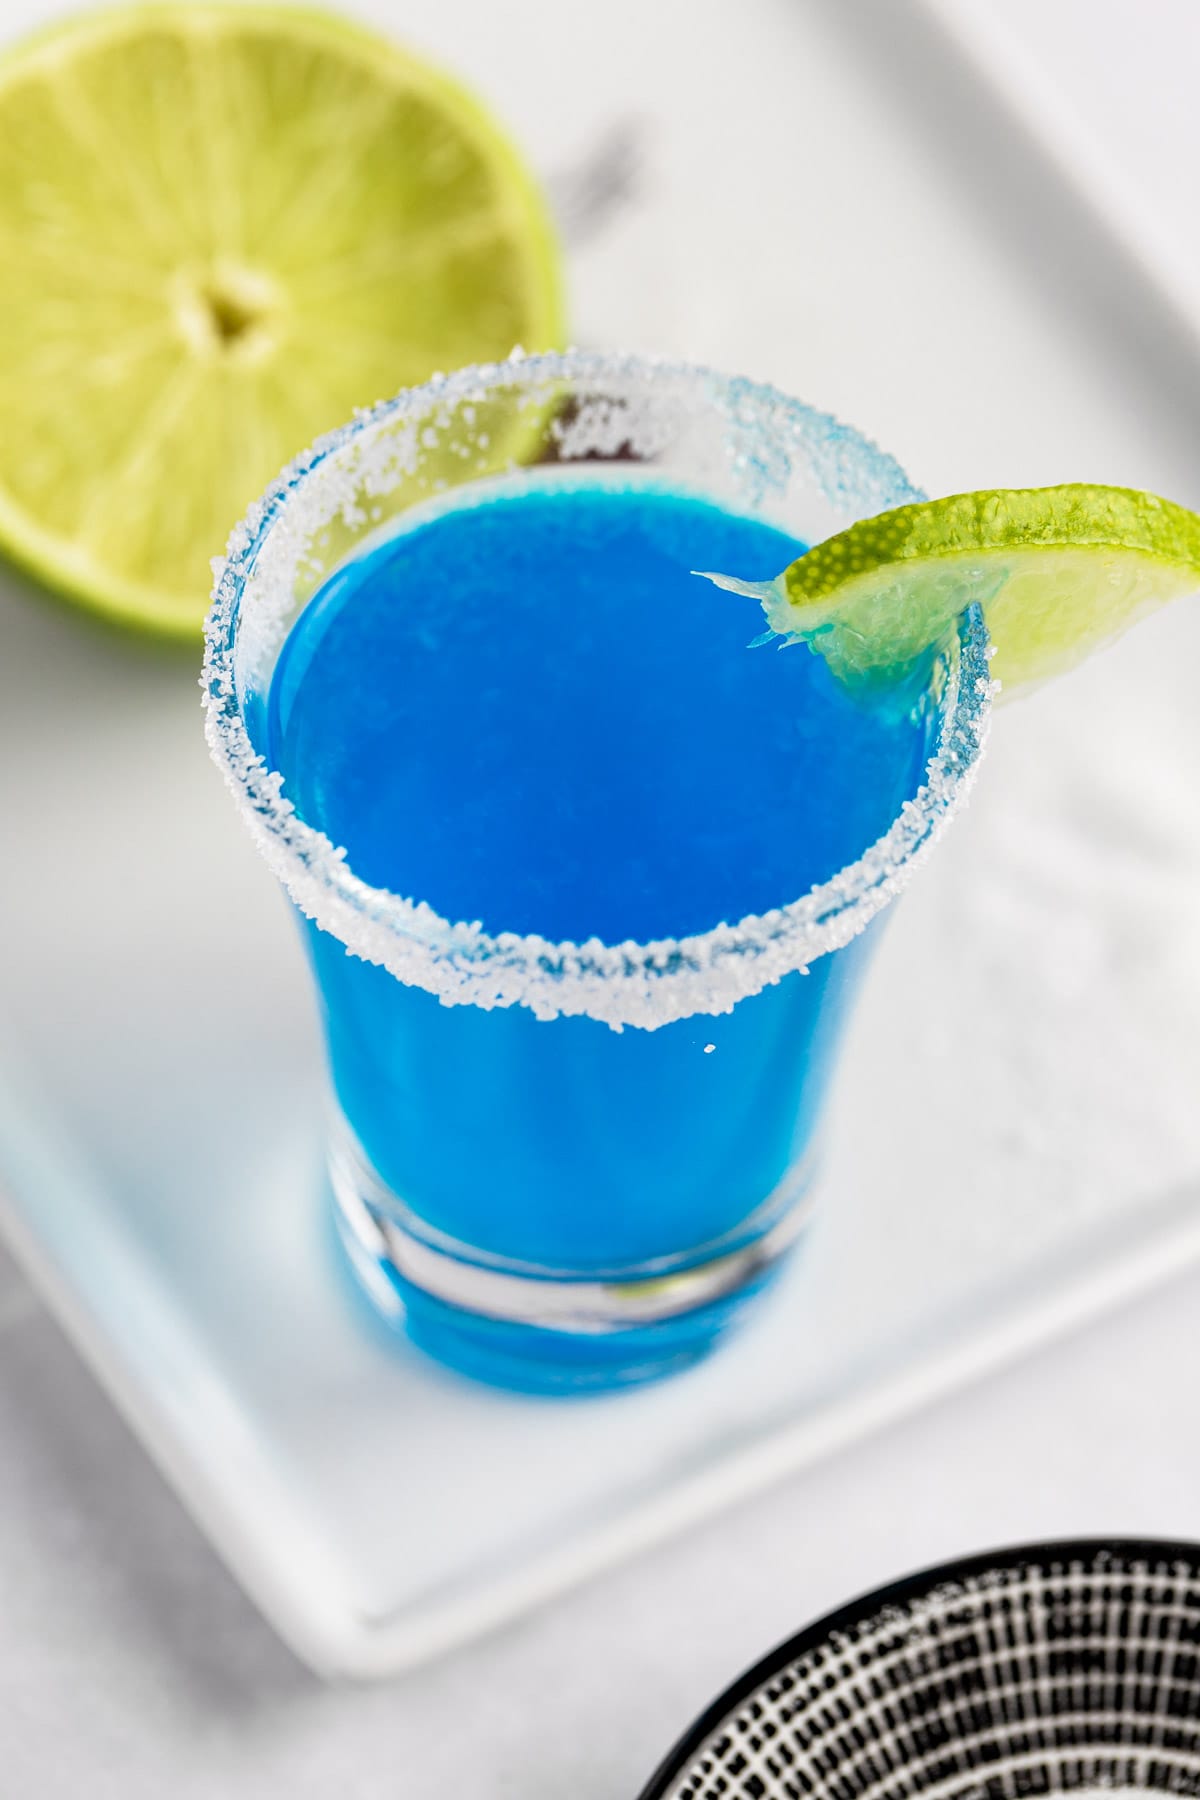 An overhead view of a blue kamikaze shot with a sugar rim, garnished with a slice of lime.